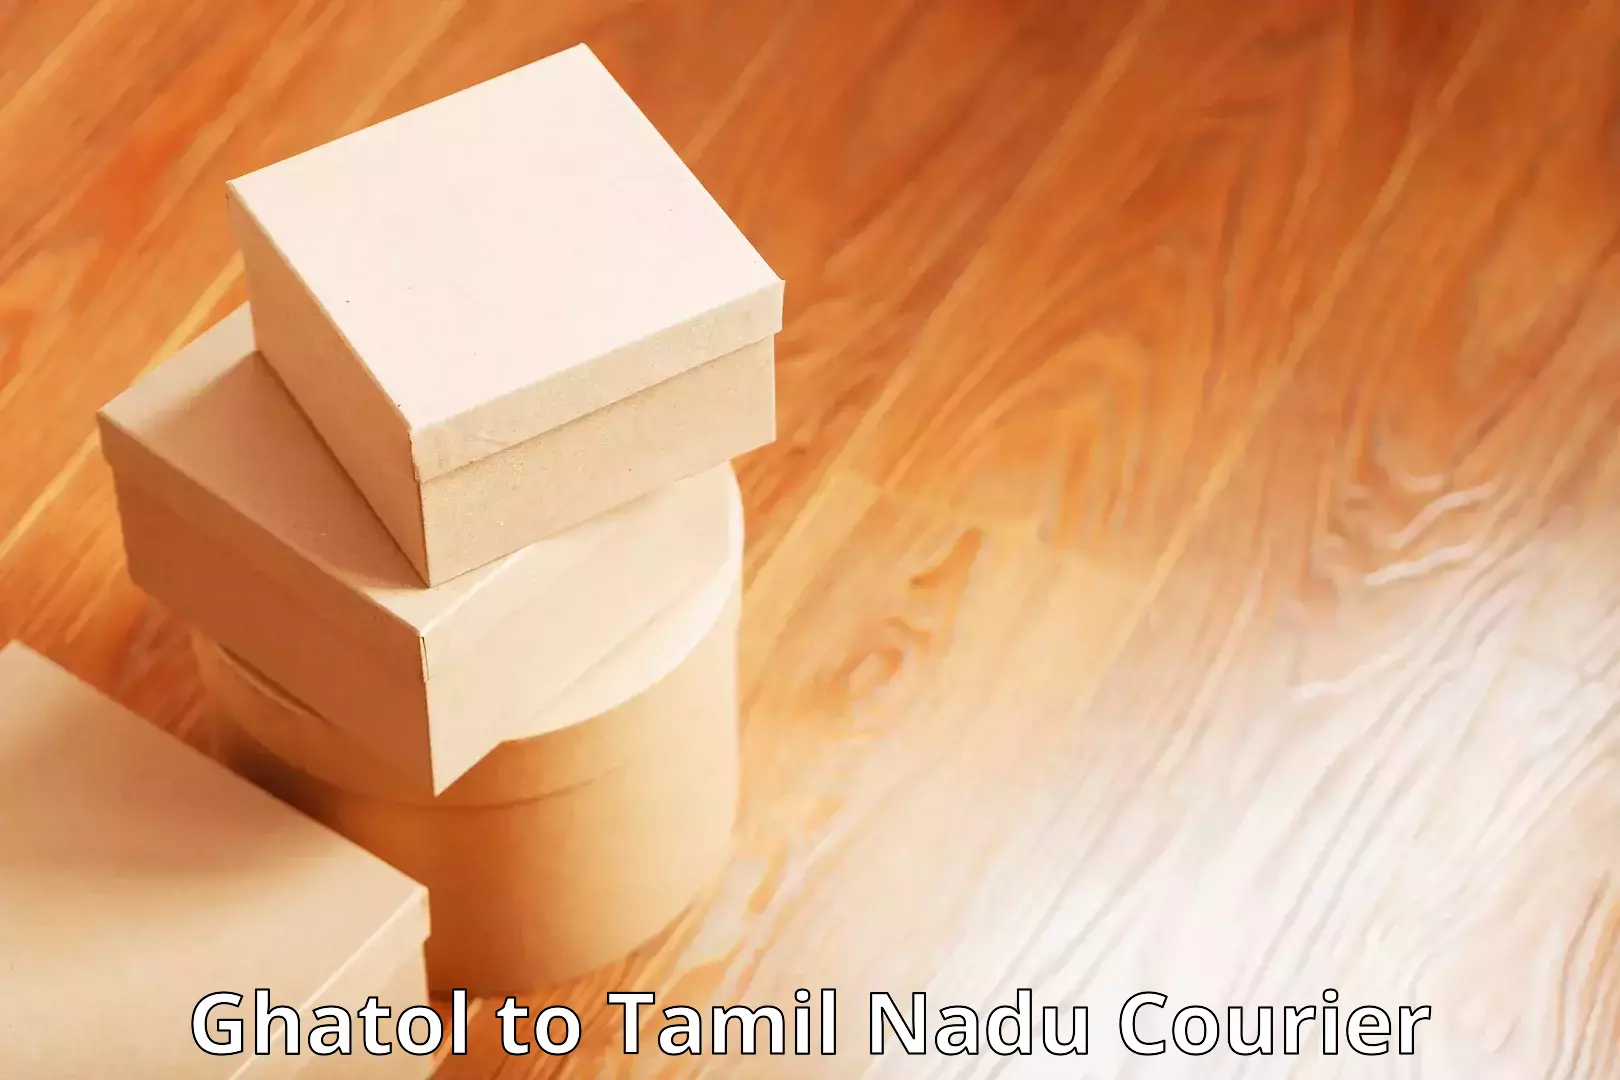 Automated shipping processes Ghatol to Tamil Nadu